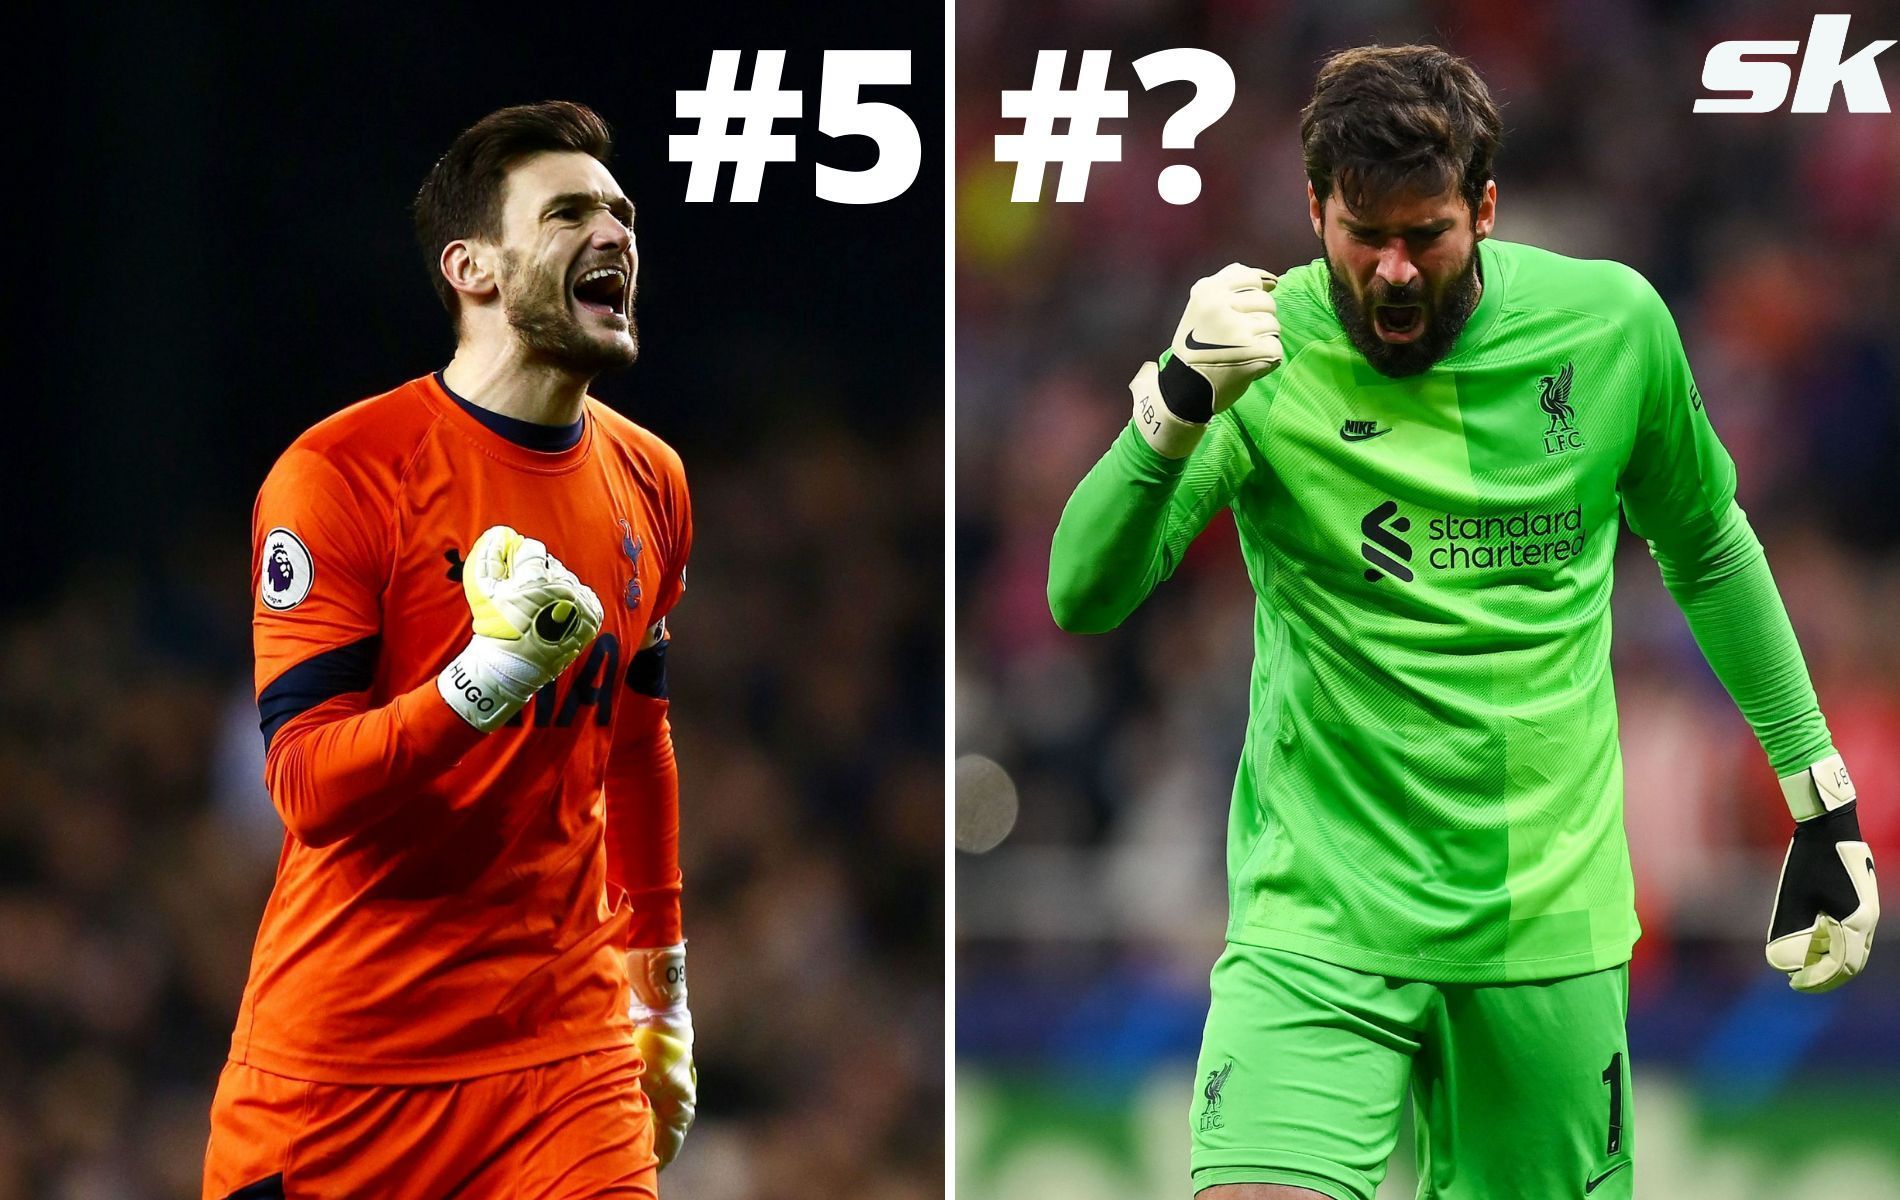 Who is the goalkeeper with the best distribution in the Premier League?